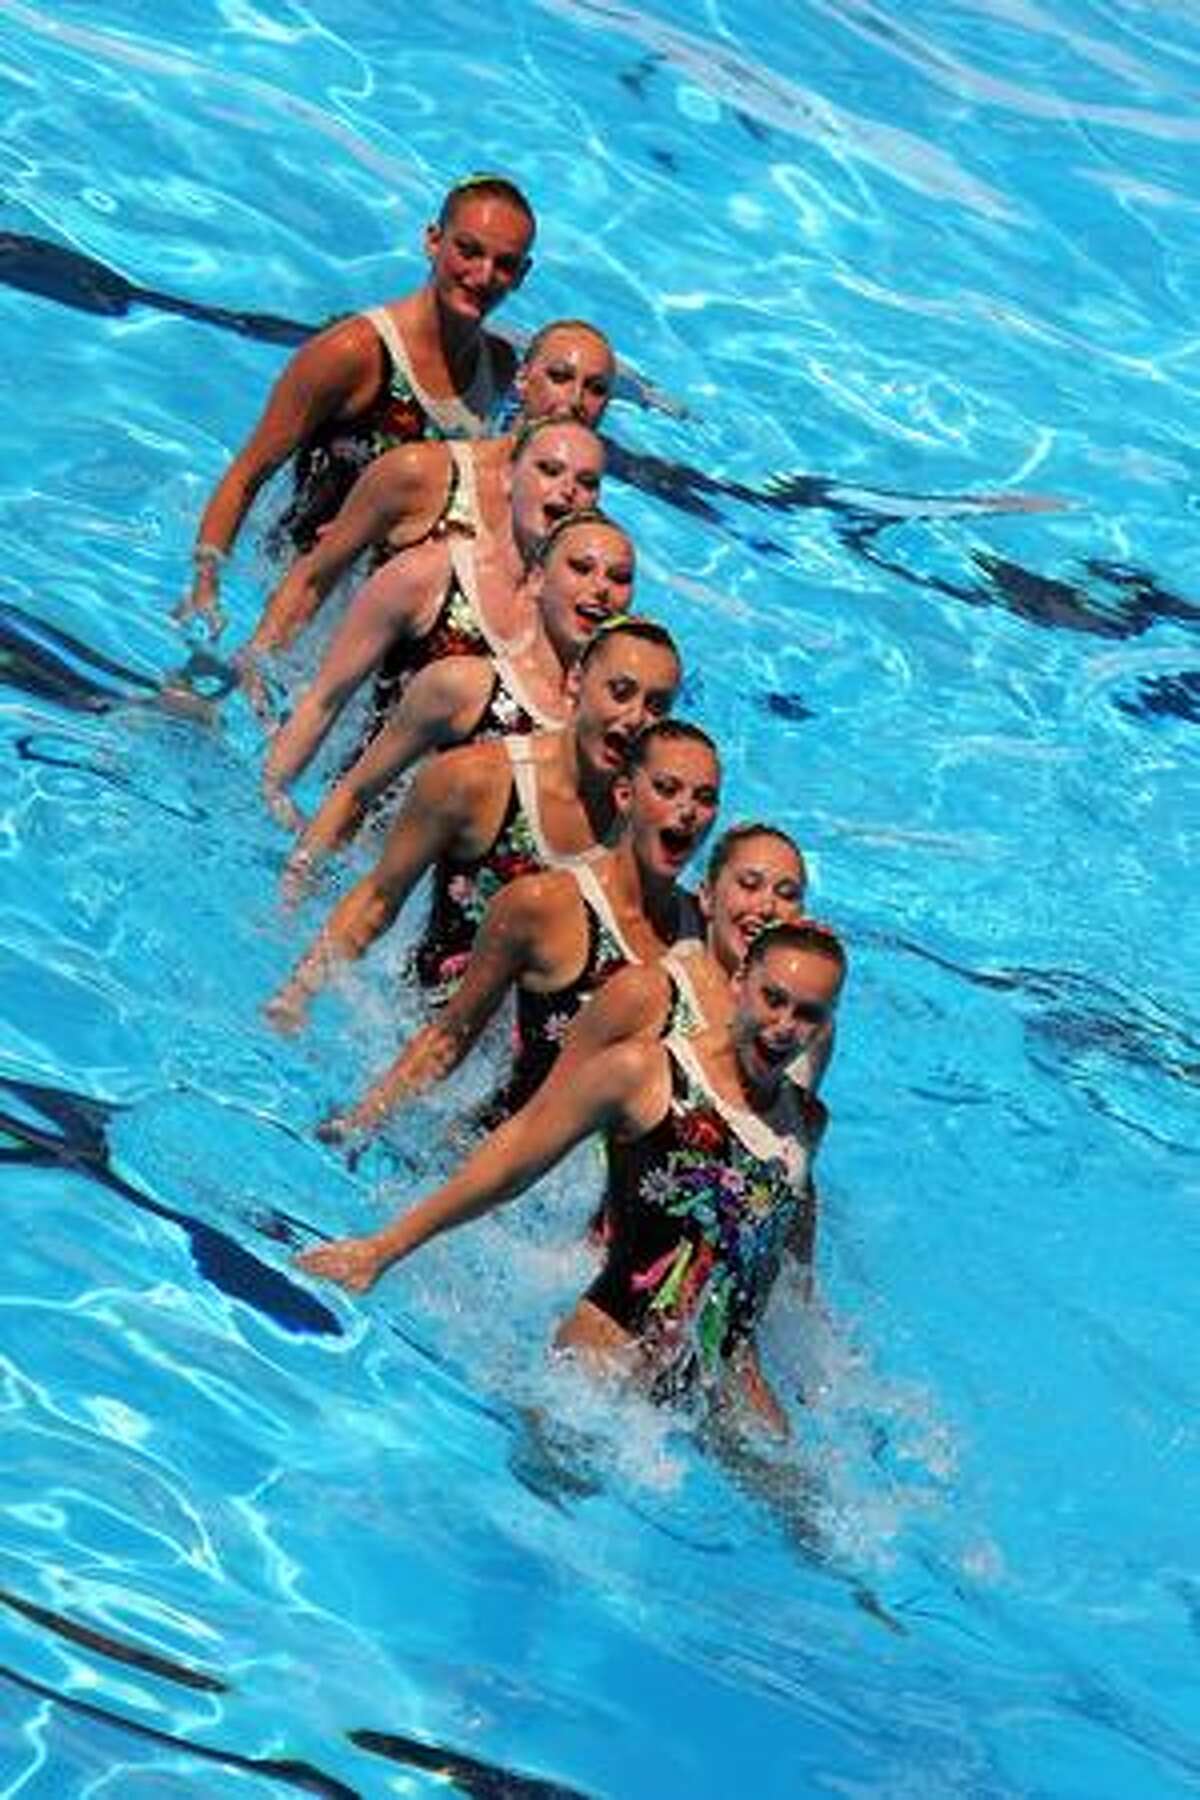 Team Ukraine compete in the Womens Synchronised Swimming Team Technical Final at the Stadio del Nuoto Sincronizzato on Sunday in Rome, Italy.